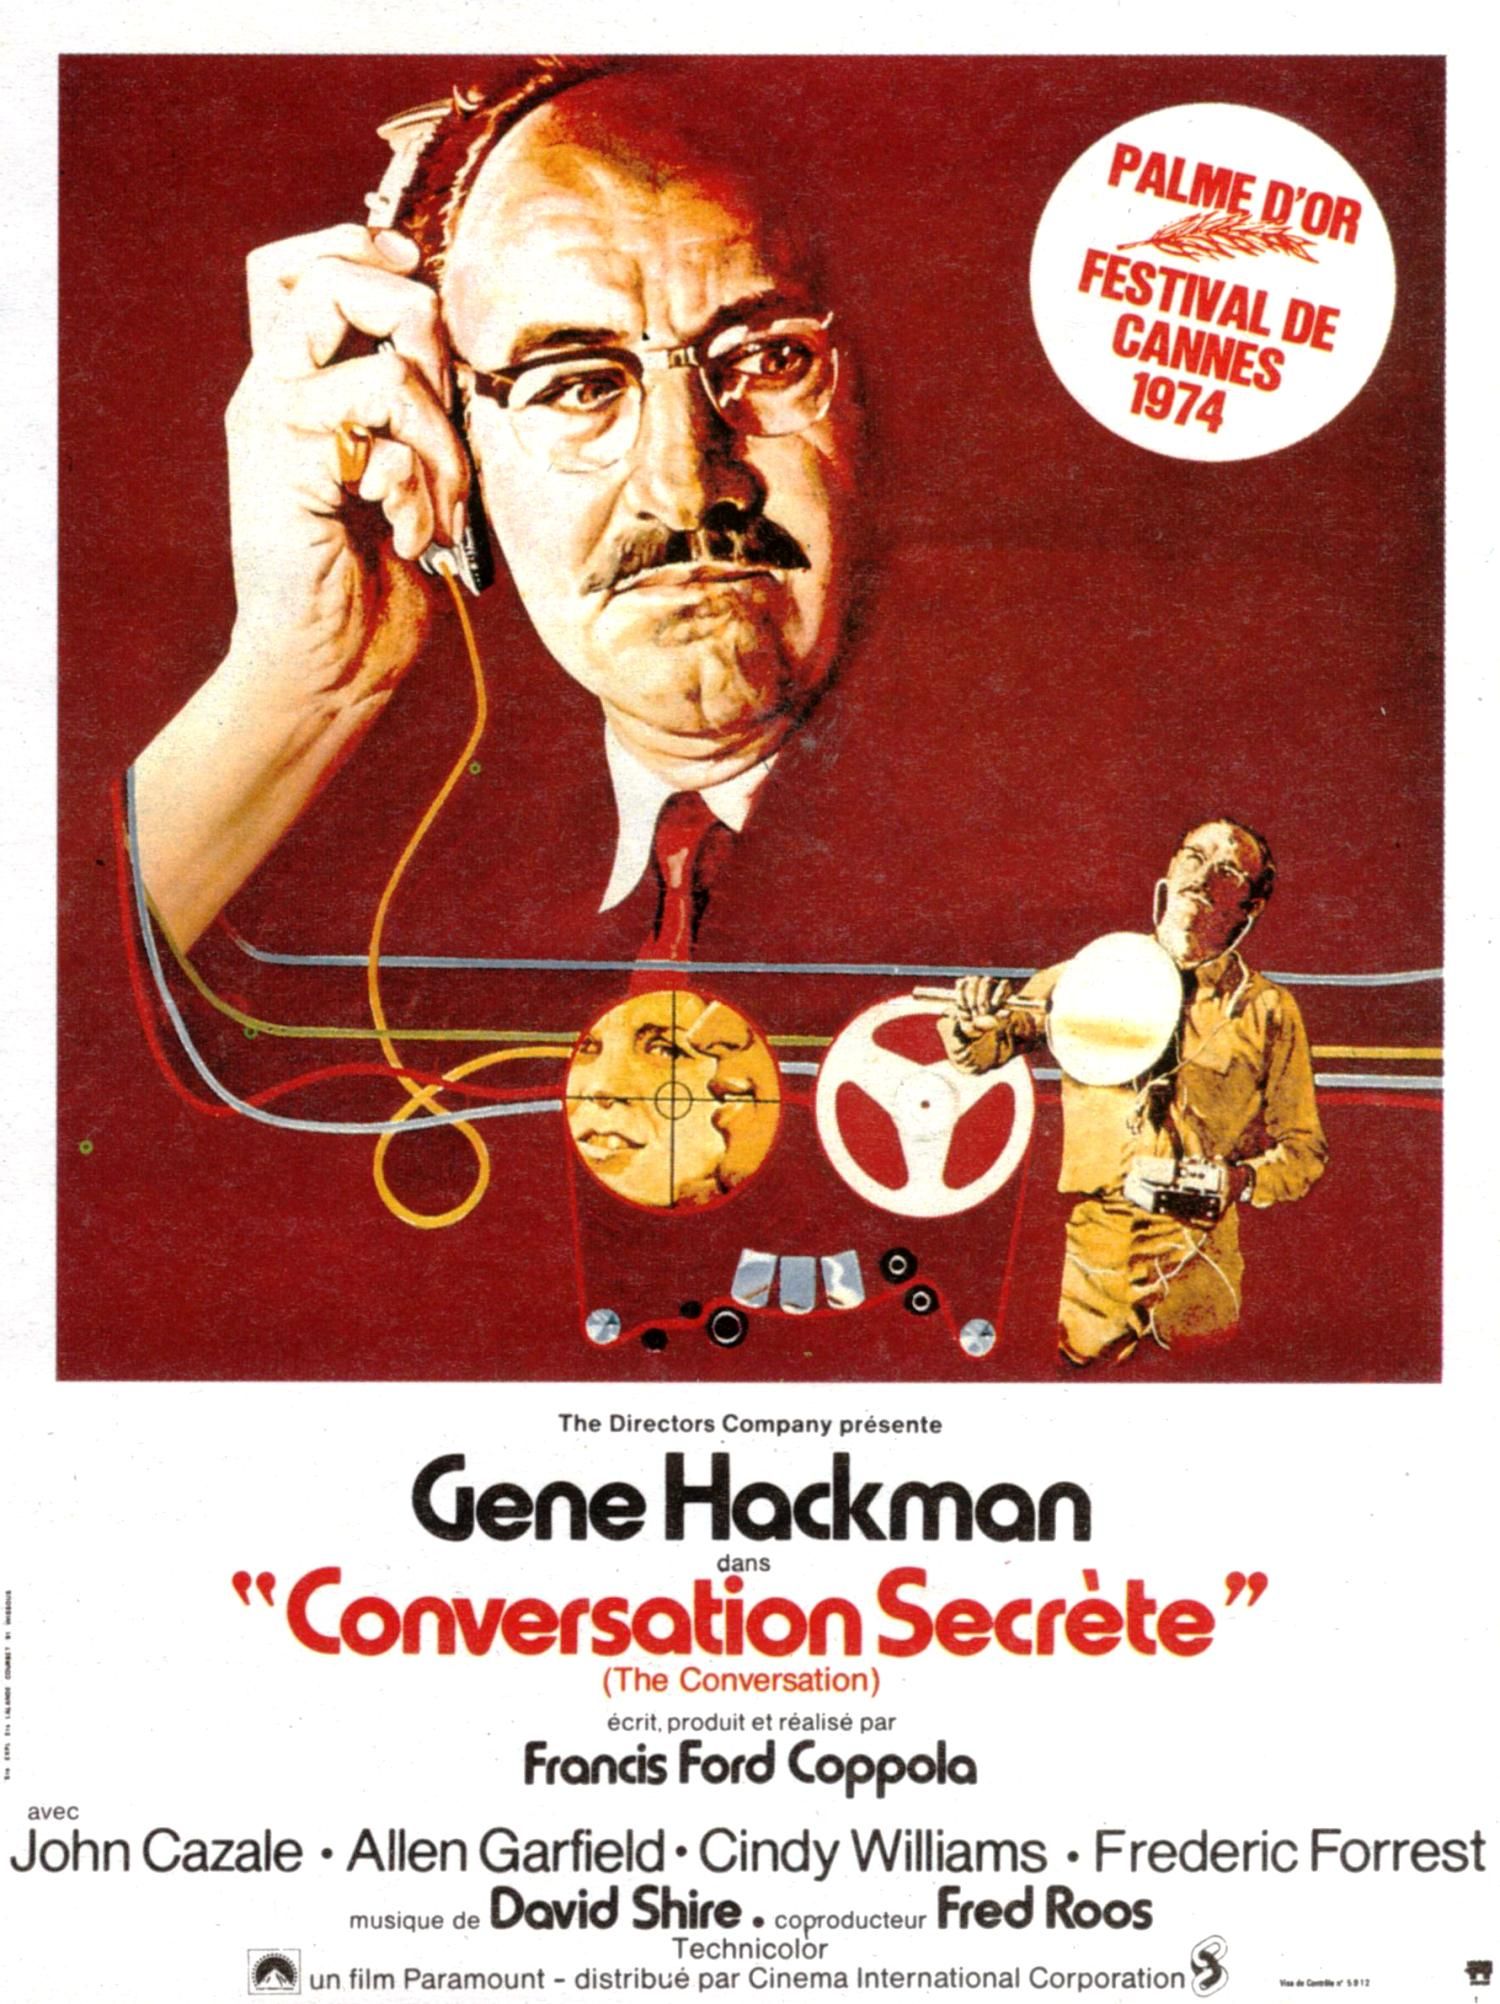 Watch francis ford coppola's the conversation 1974 #9